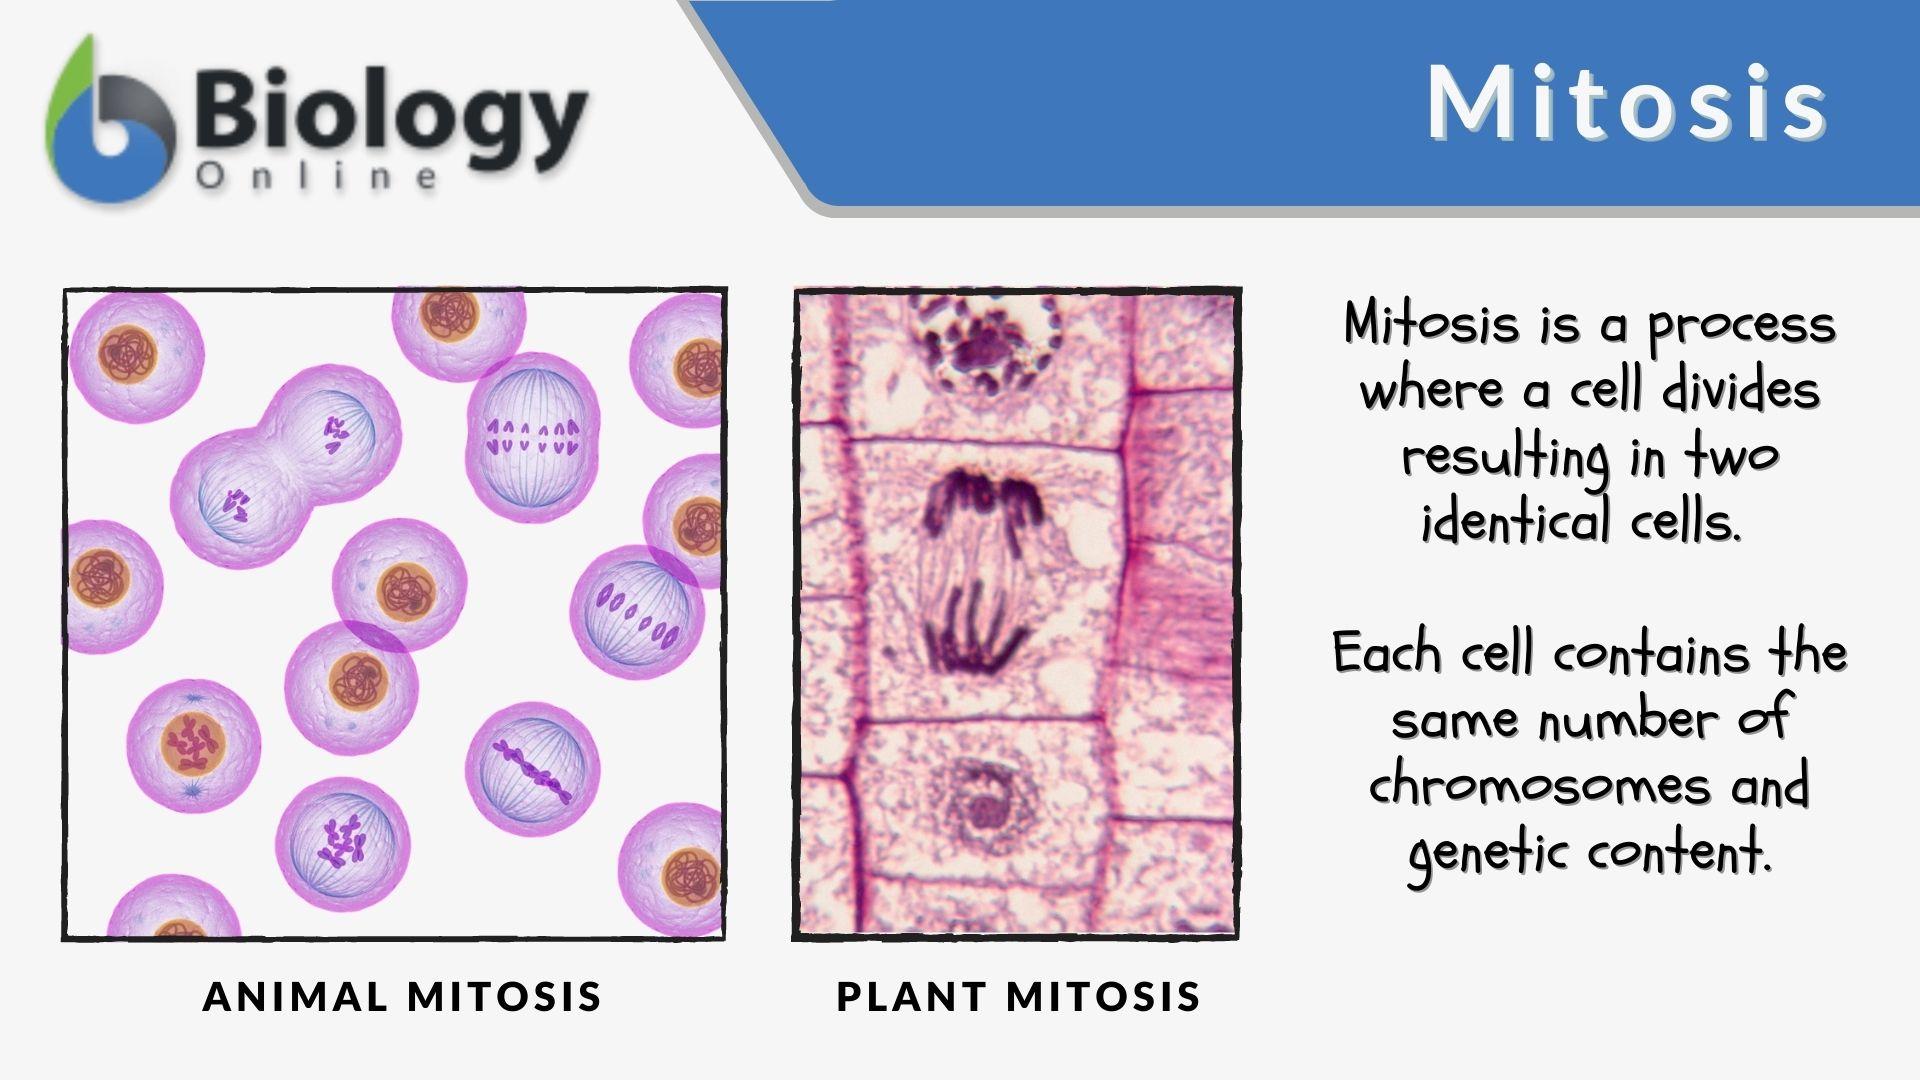 Mitosis - Definition and Examples - Biology Online Dictionary